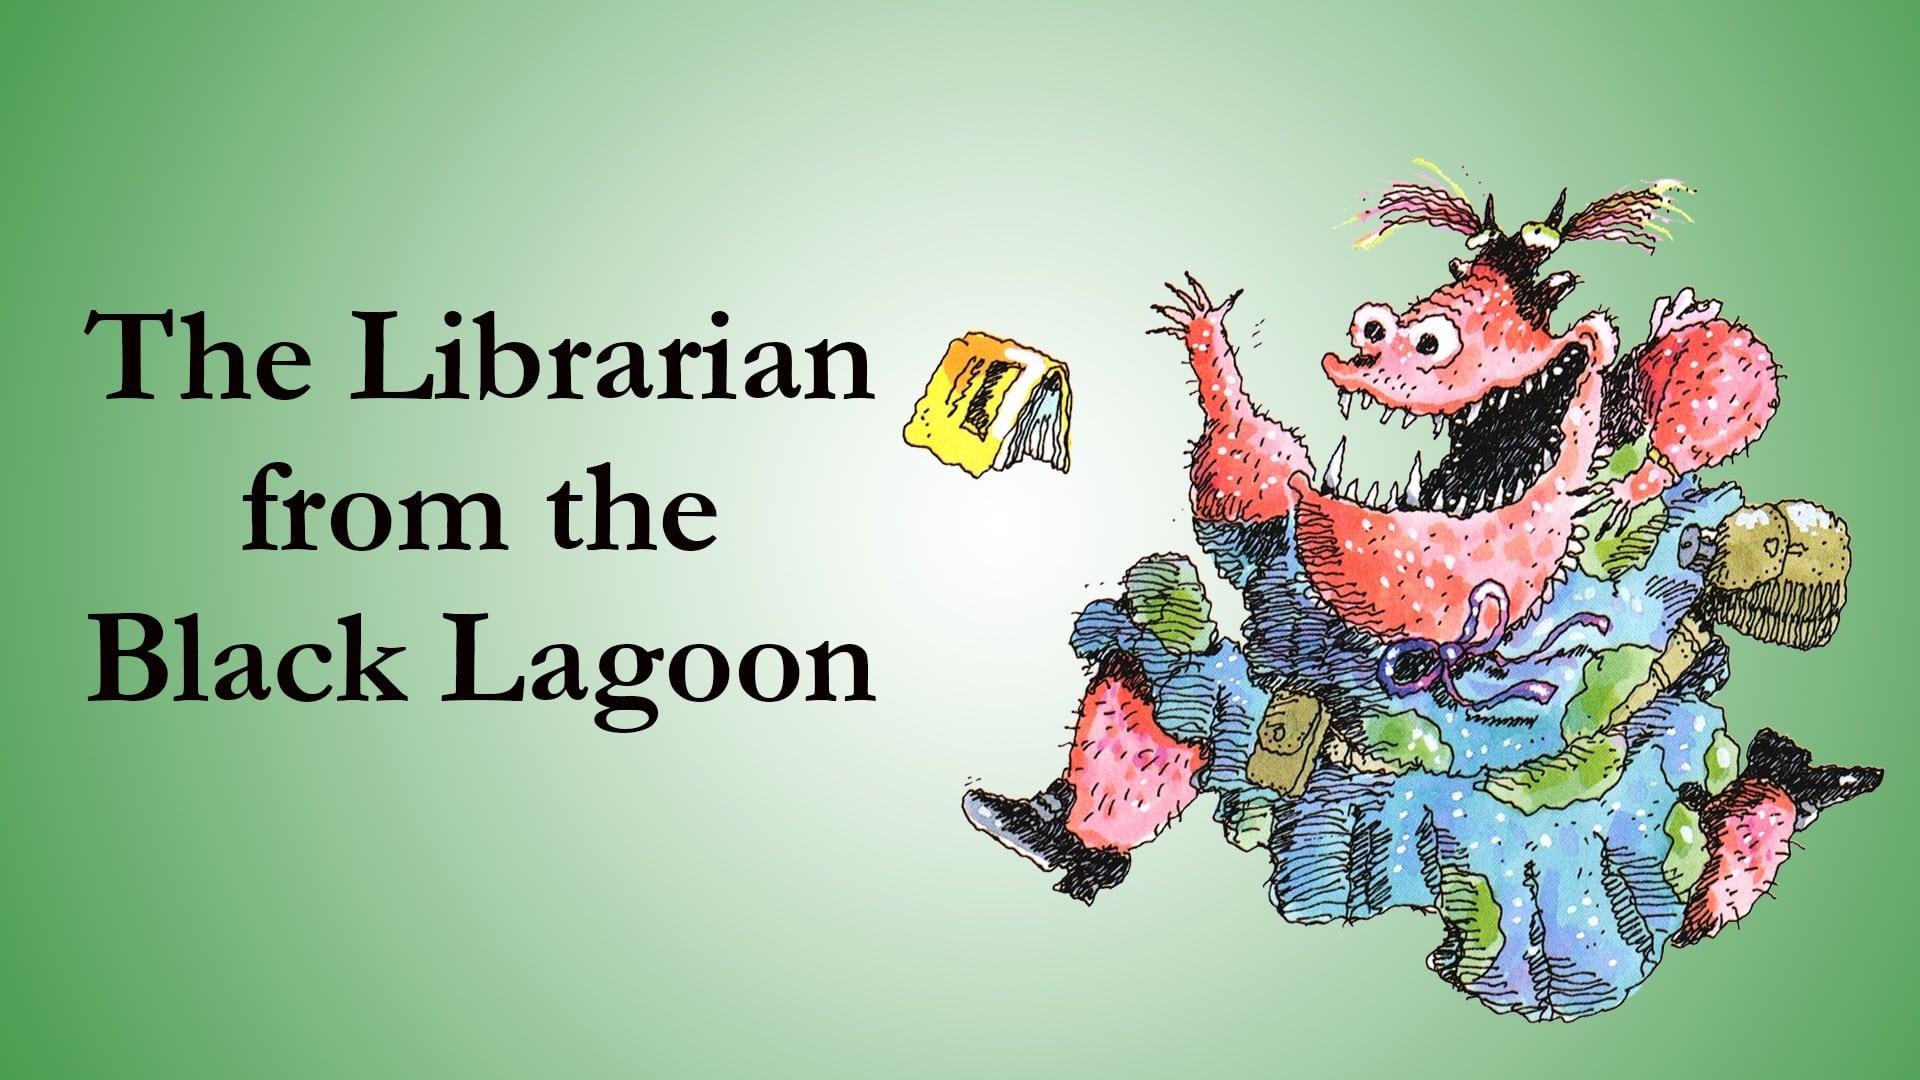 The Librarian from the Black Lagoon backdrop